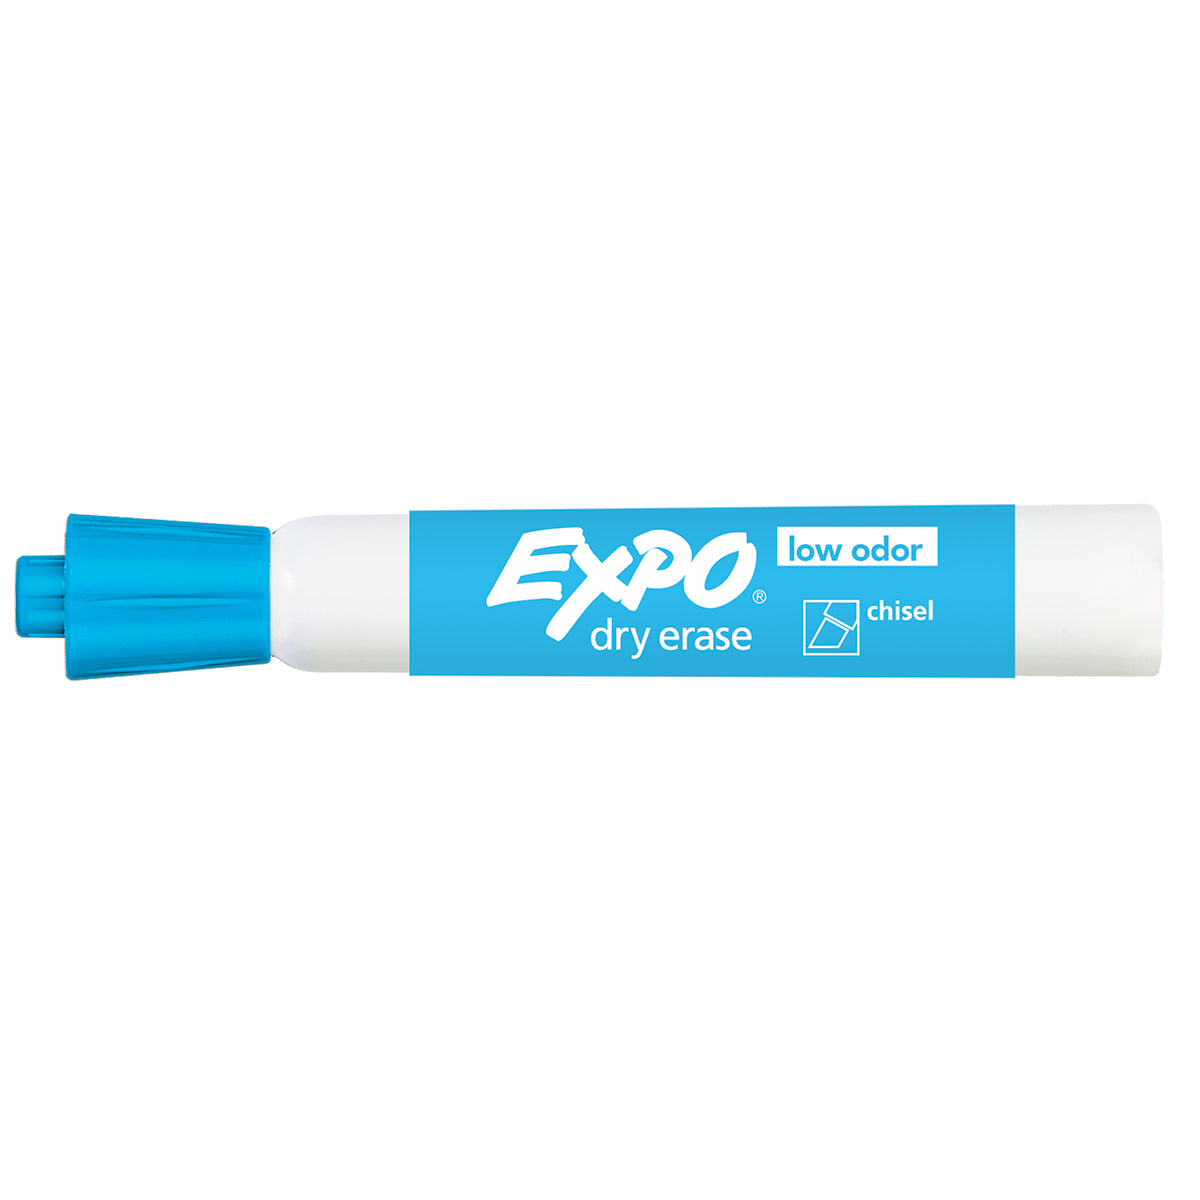 Expo Dry Erase Red, Low Odor, Ink Indicator Fine Tip MarkerPens and Pencils